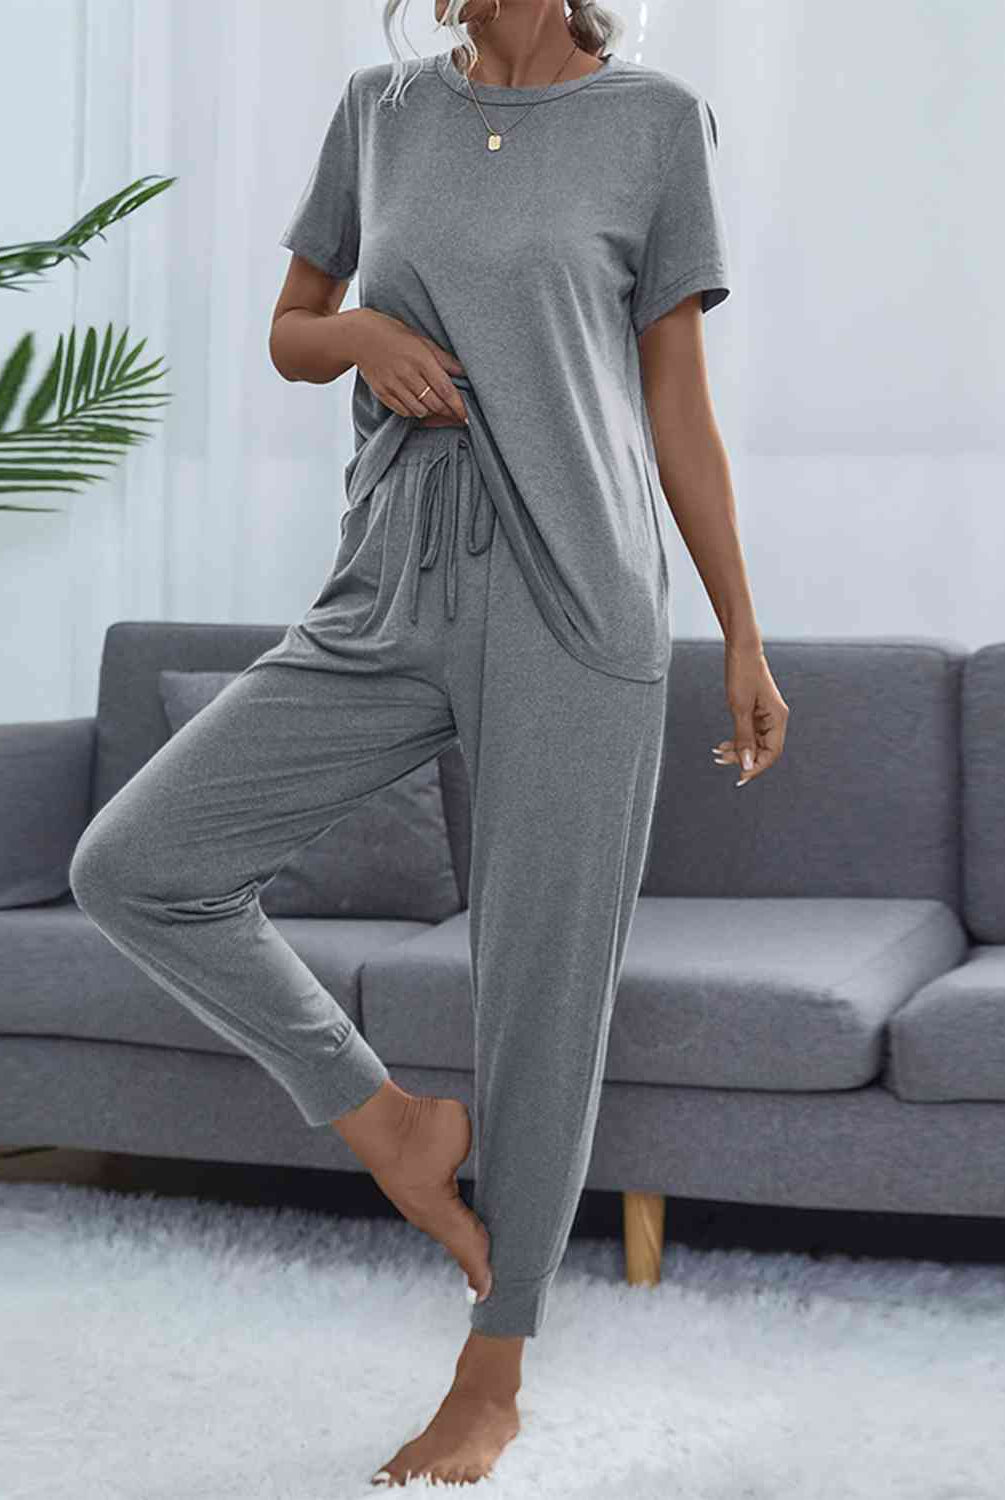 Slate Gray Round Neck Short Sleeve Top and Pants Set Loungewear